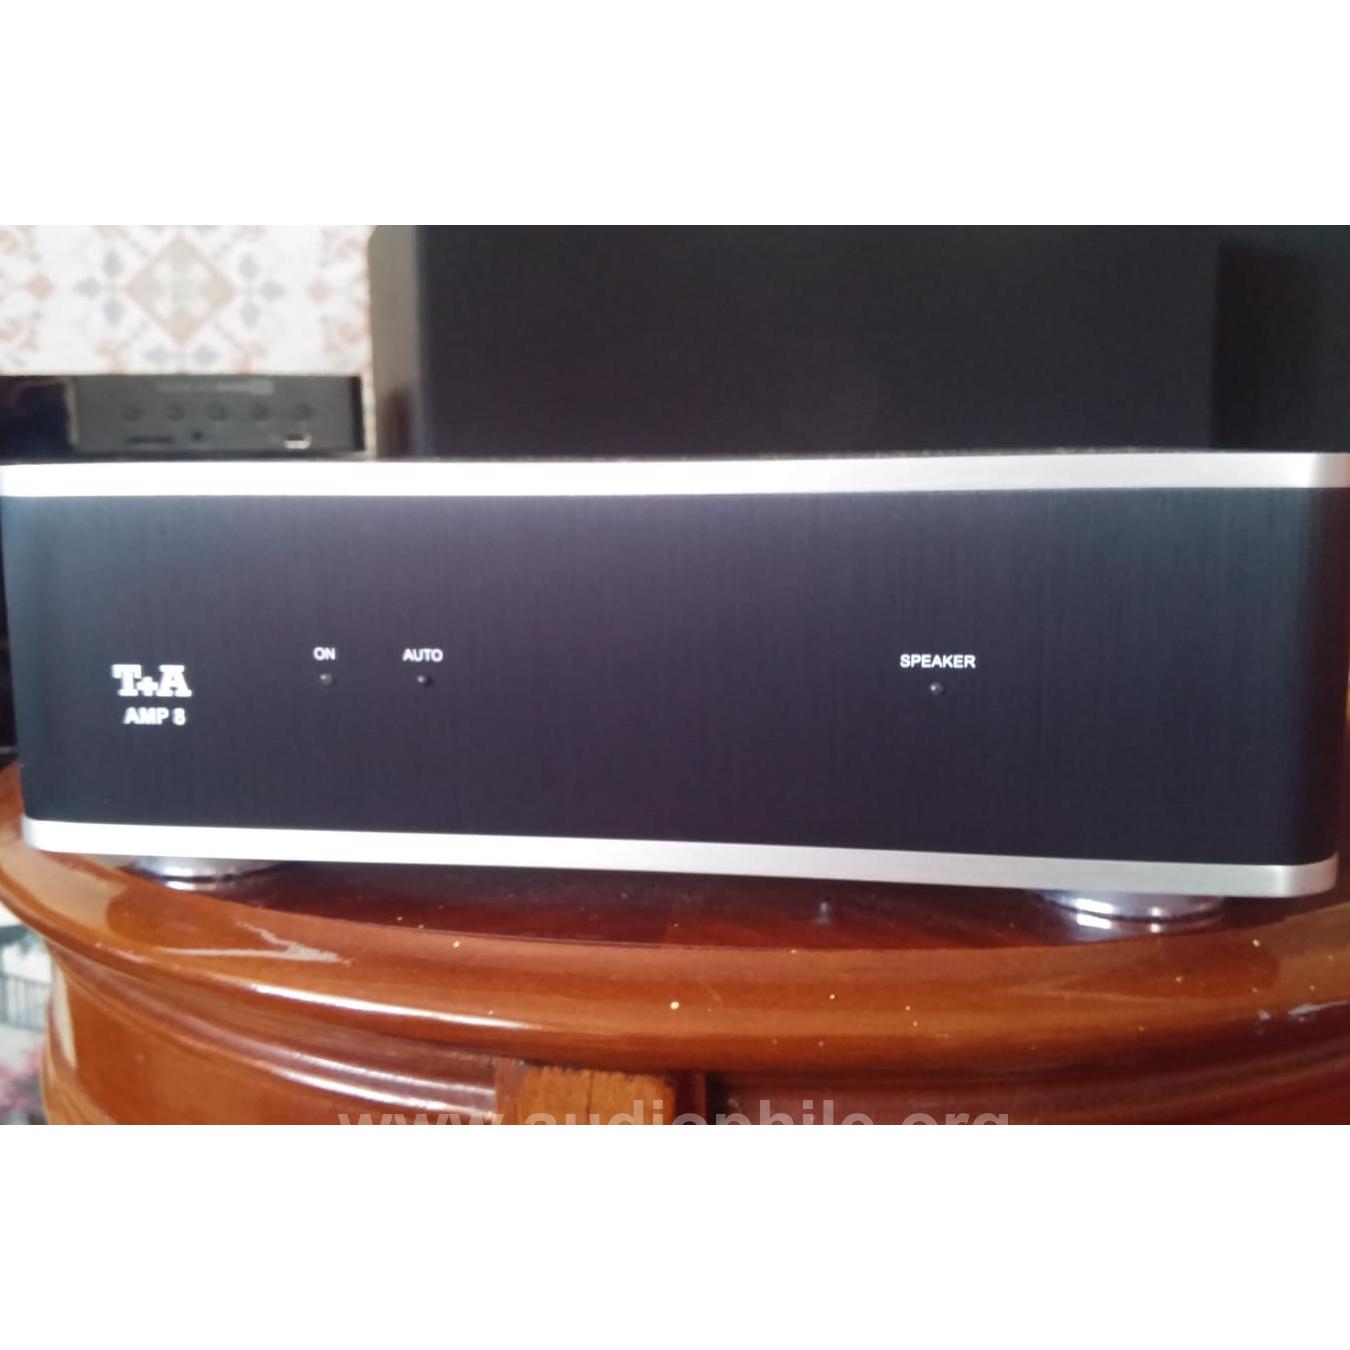 T+a - amp 8 high end stereo power amplifier- made in germany